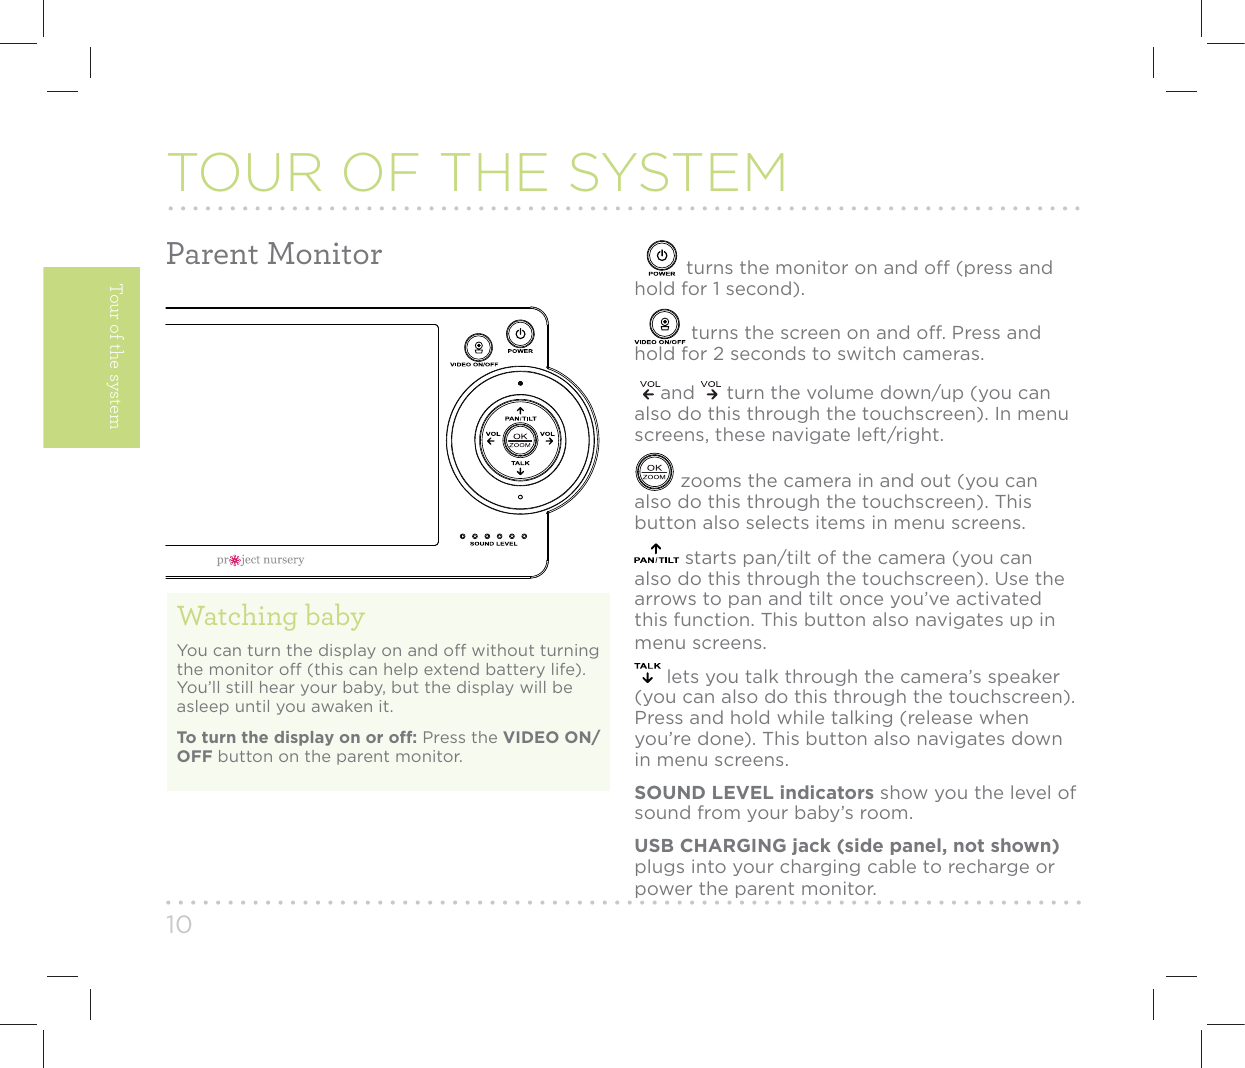 Page 10 of Voxx Accessories PNMDUALCAM WiFi Camera User Manual 